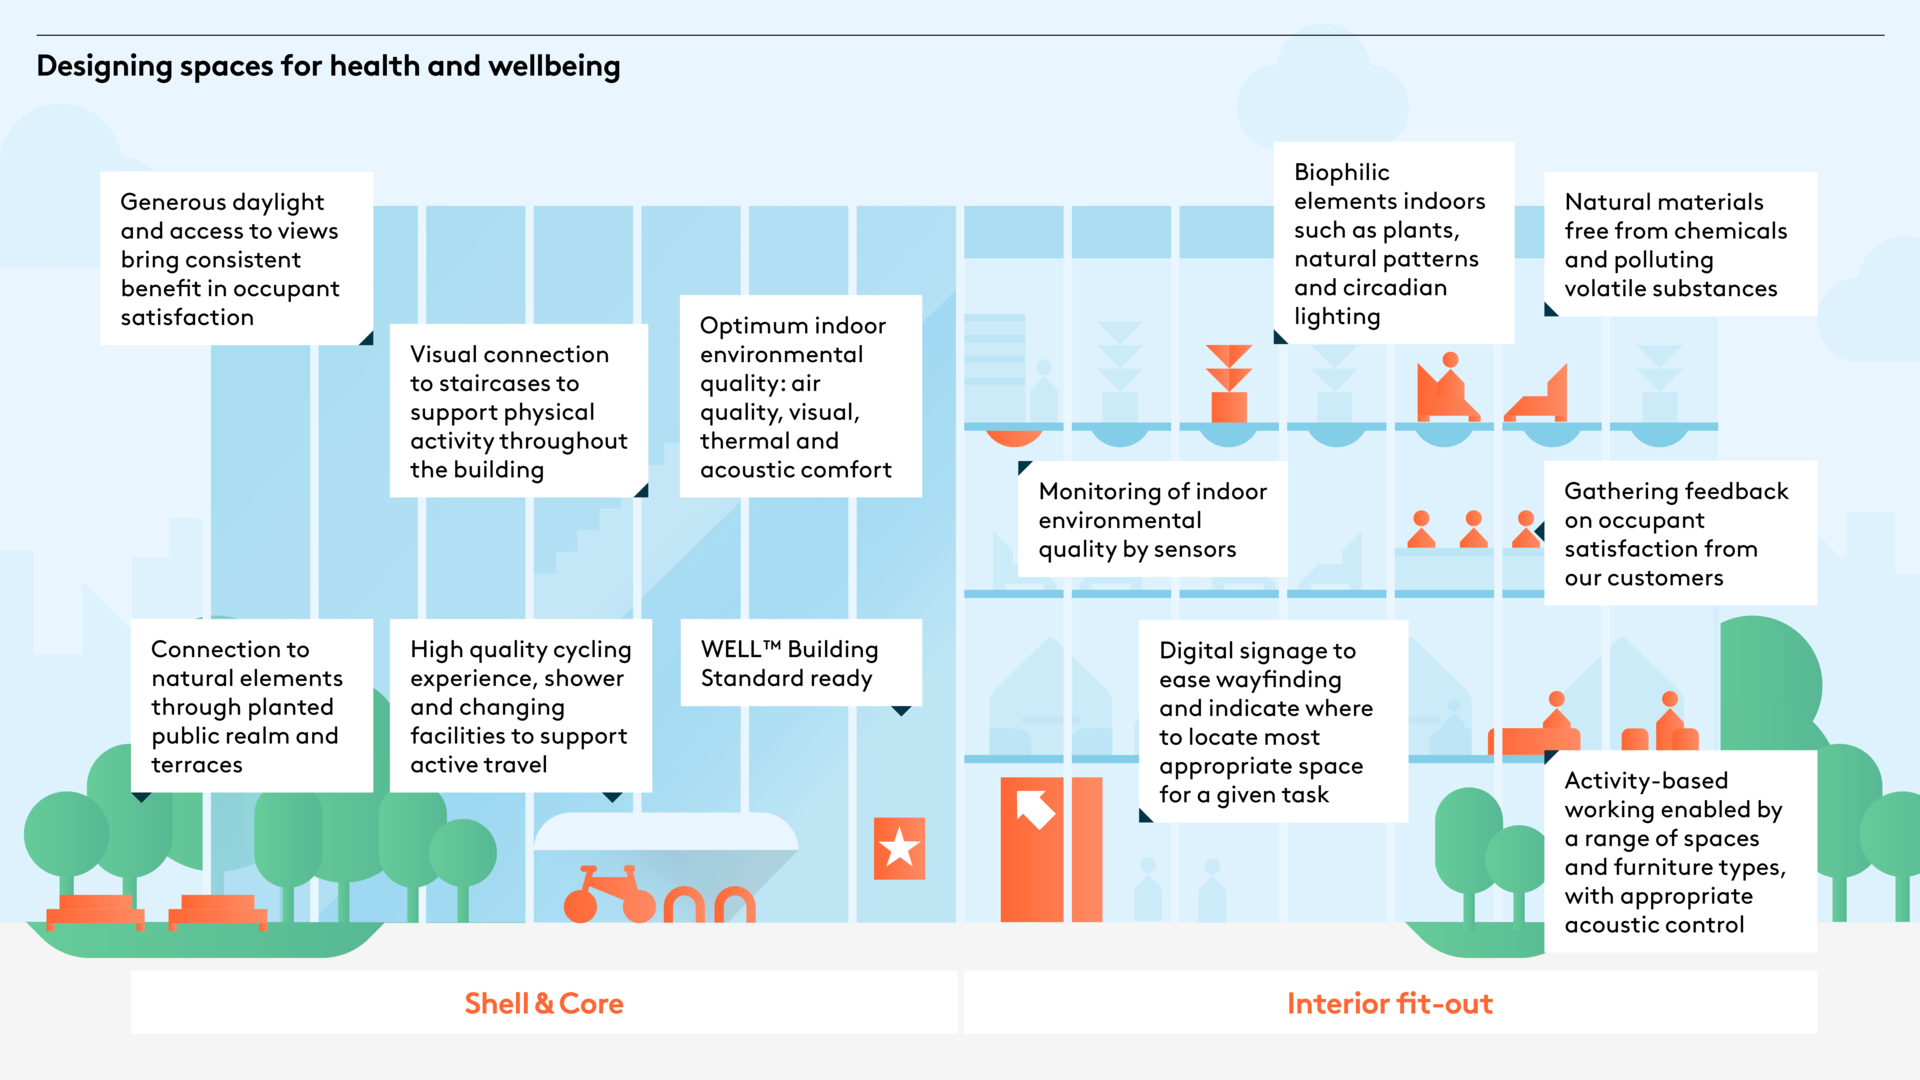 Designing space for health and wellbeing